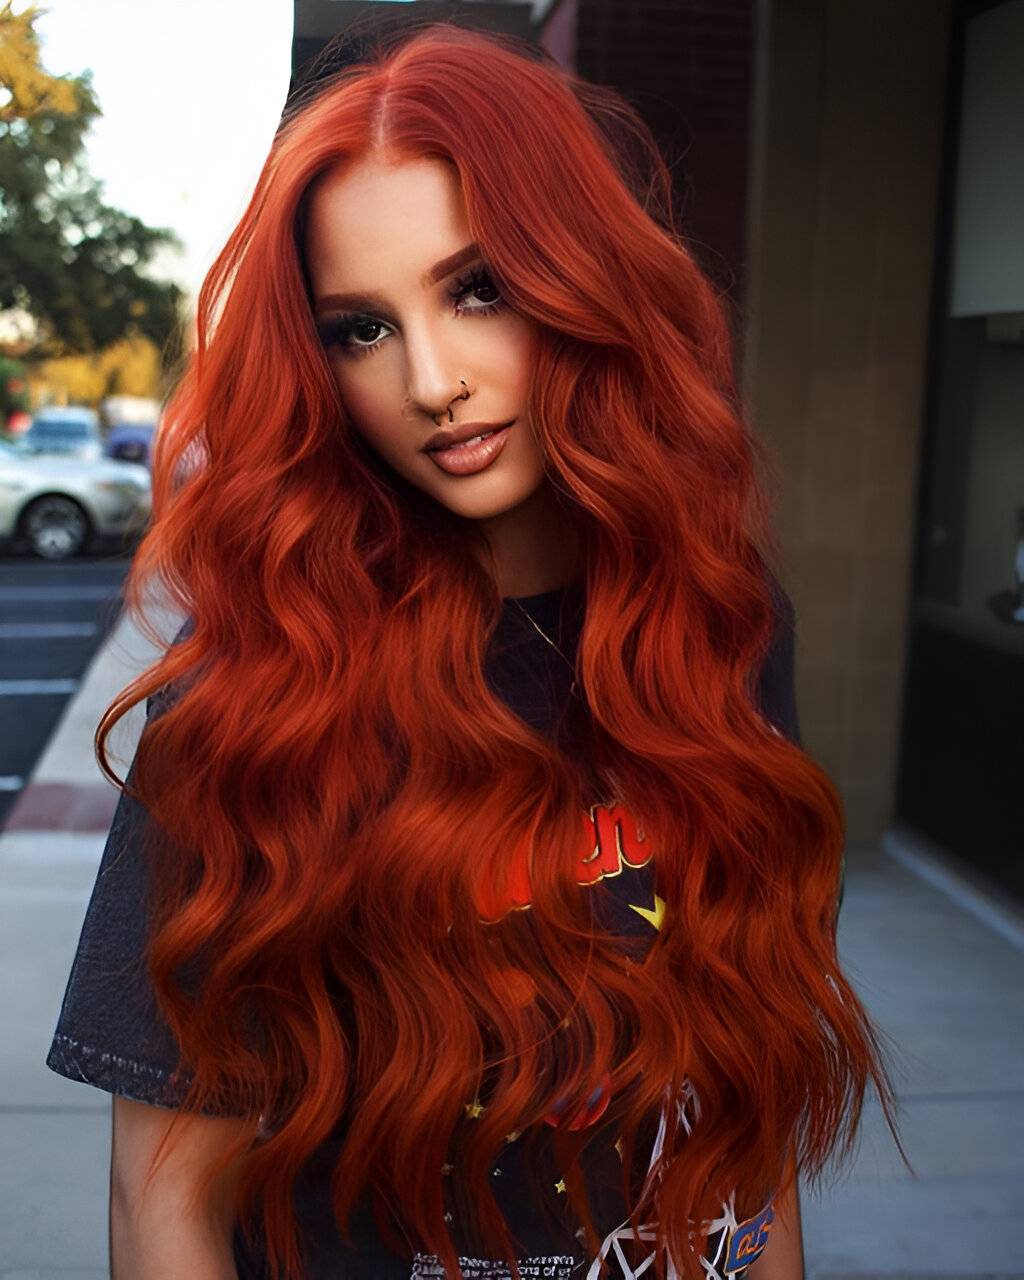 25 Gorgeous Orange Hair Ideas To Look Stunning Like A Model - 185